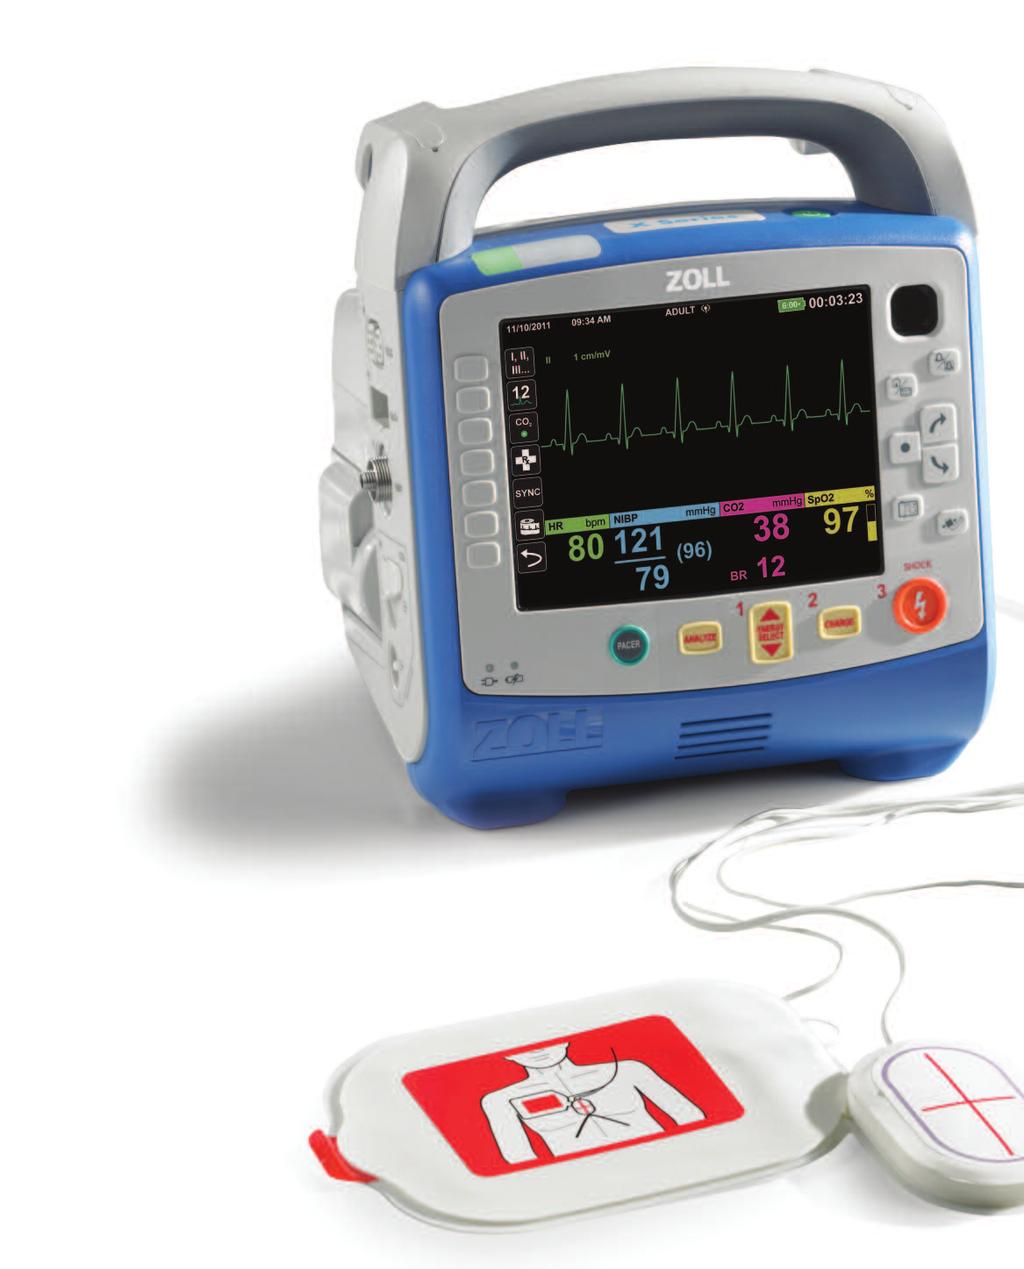 The Perfect Screen for EMS X Series Display four waveforms of your choice simultaneously and a 12-lead ECG for onscreen review. Switch to high-contrast black-and-white or night vision mode.